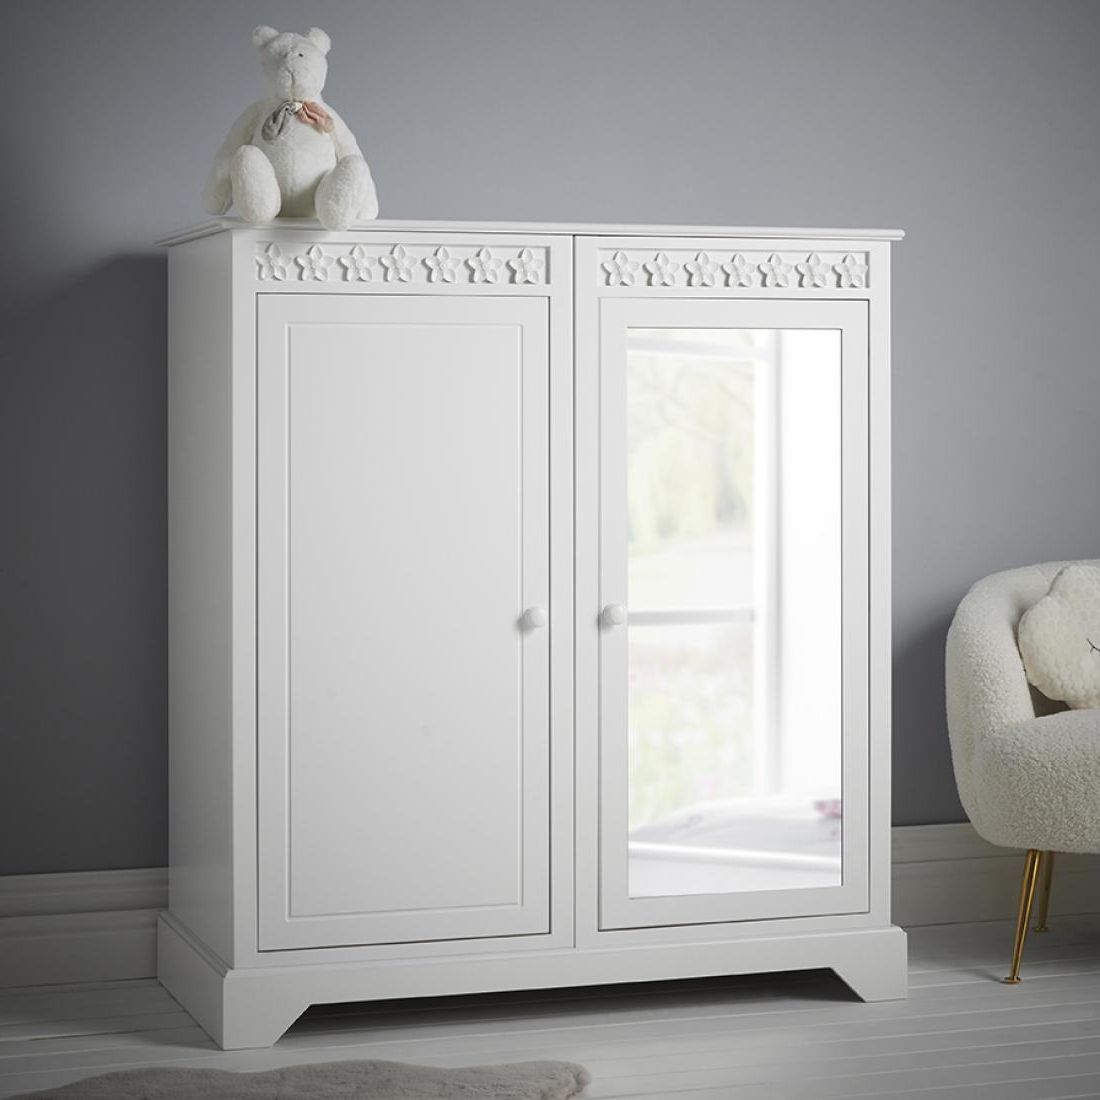 Daisy Brambles Mirrored All Hanging Mini Wardrobe | Luxury Childrens  Furniture Pertaining To Small Tallboy Wardrobes (View 8 of 20)